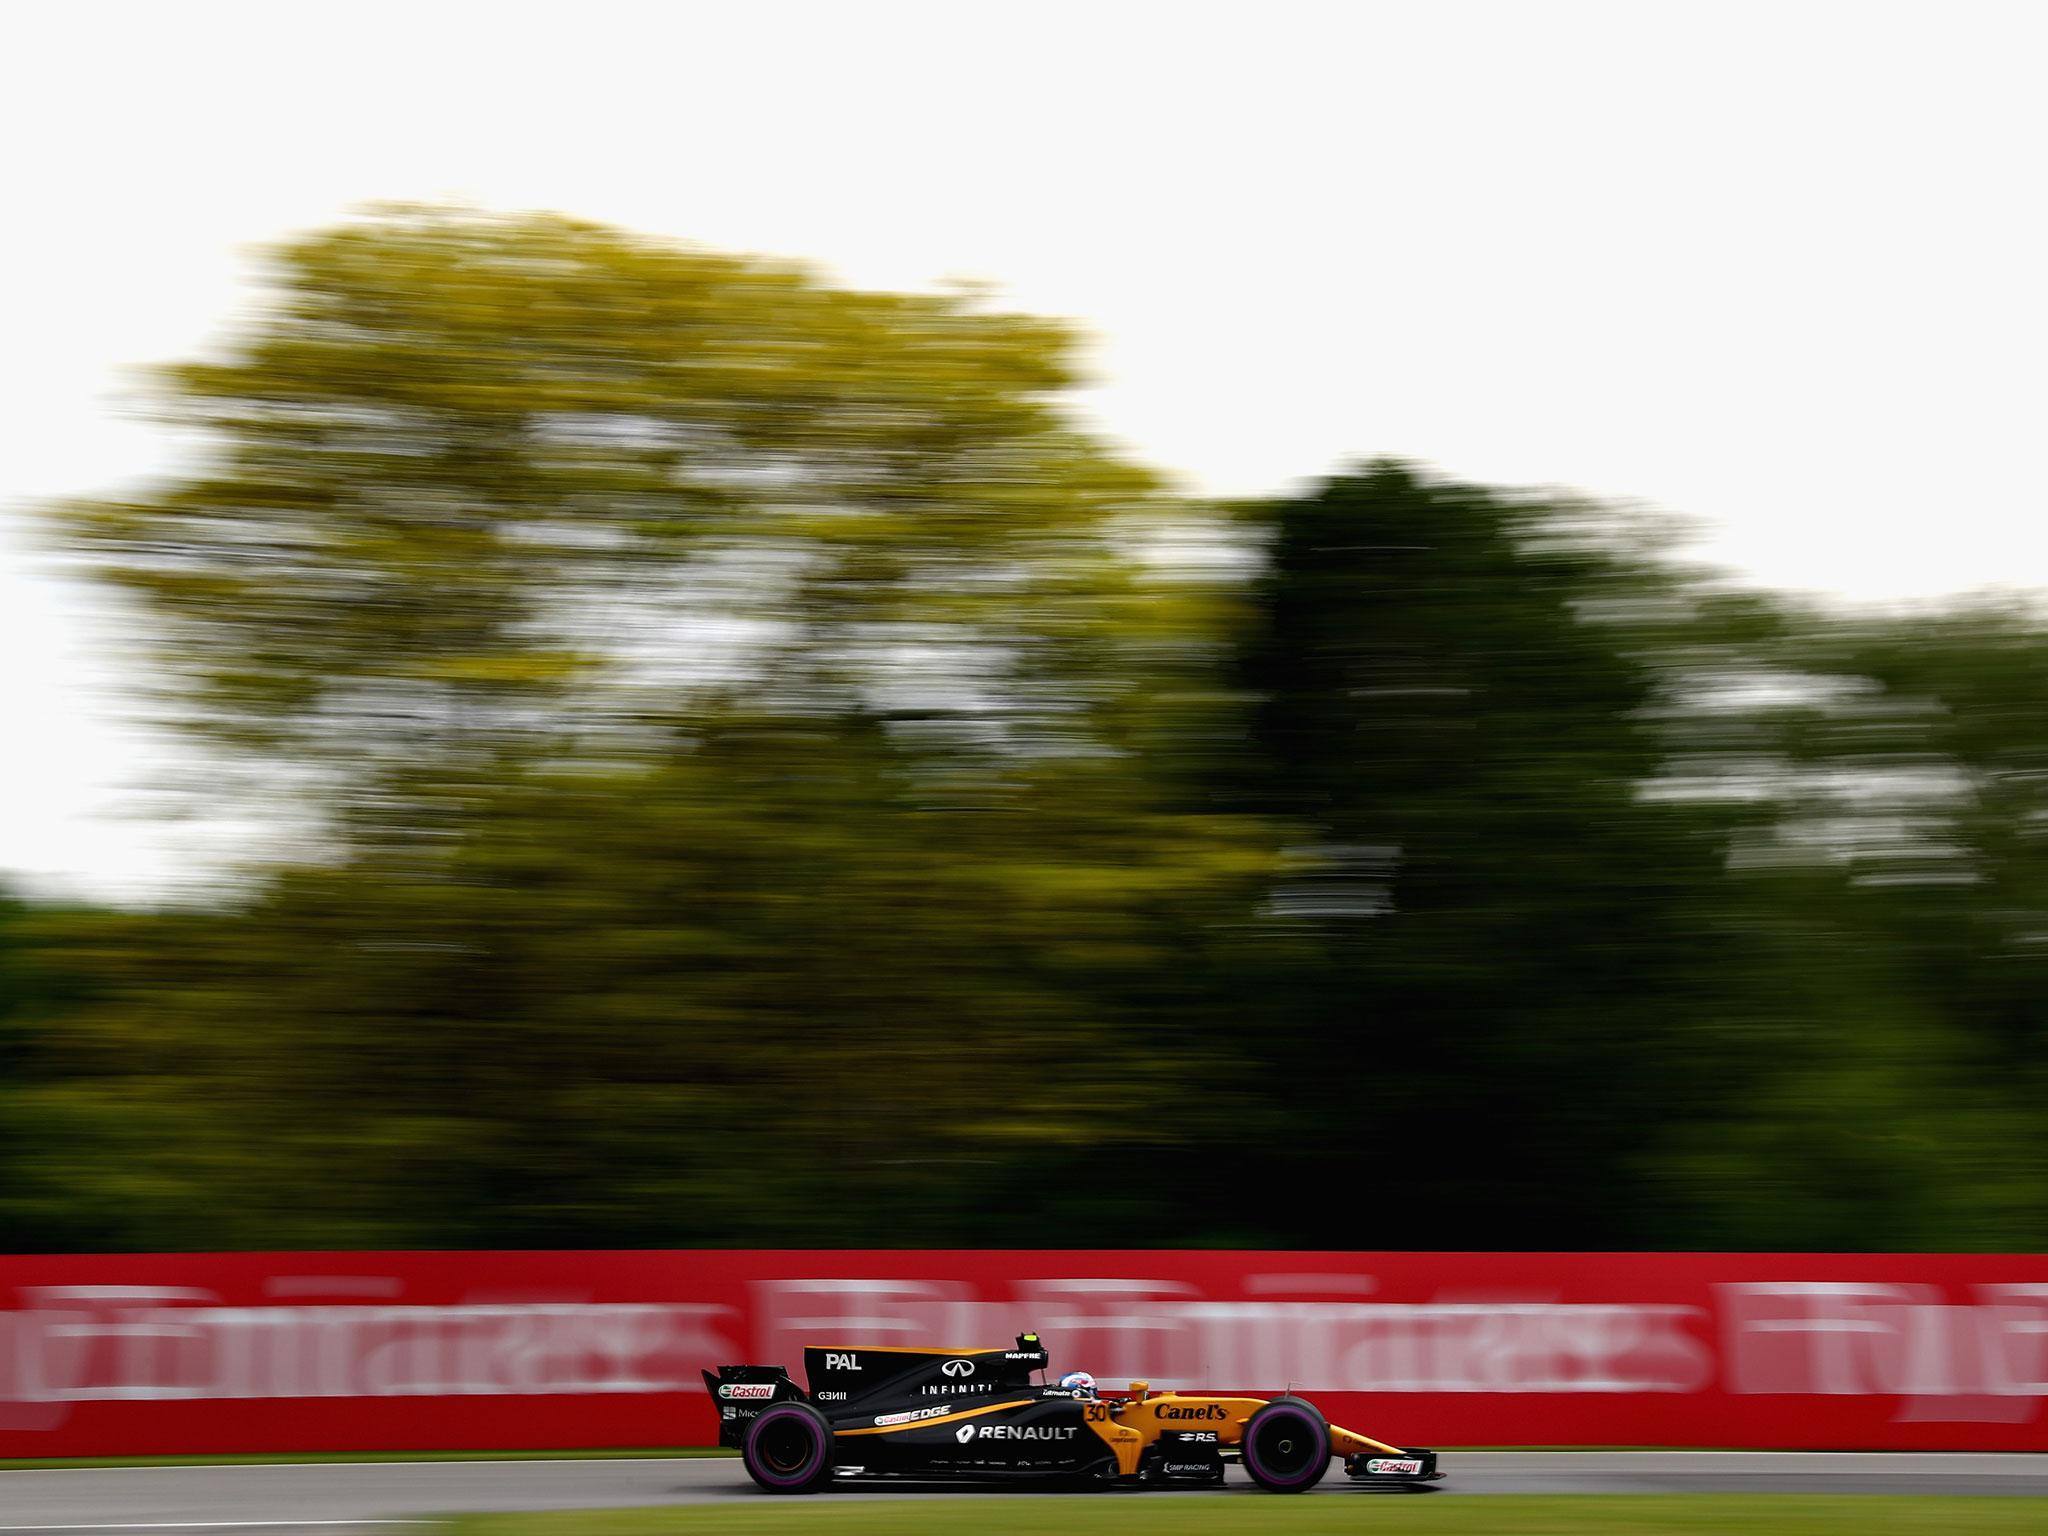 The drivers, including Brit Jolyon Palmer, will pause before Sunday's race